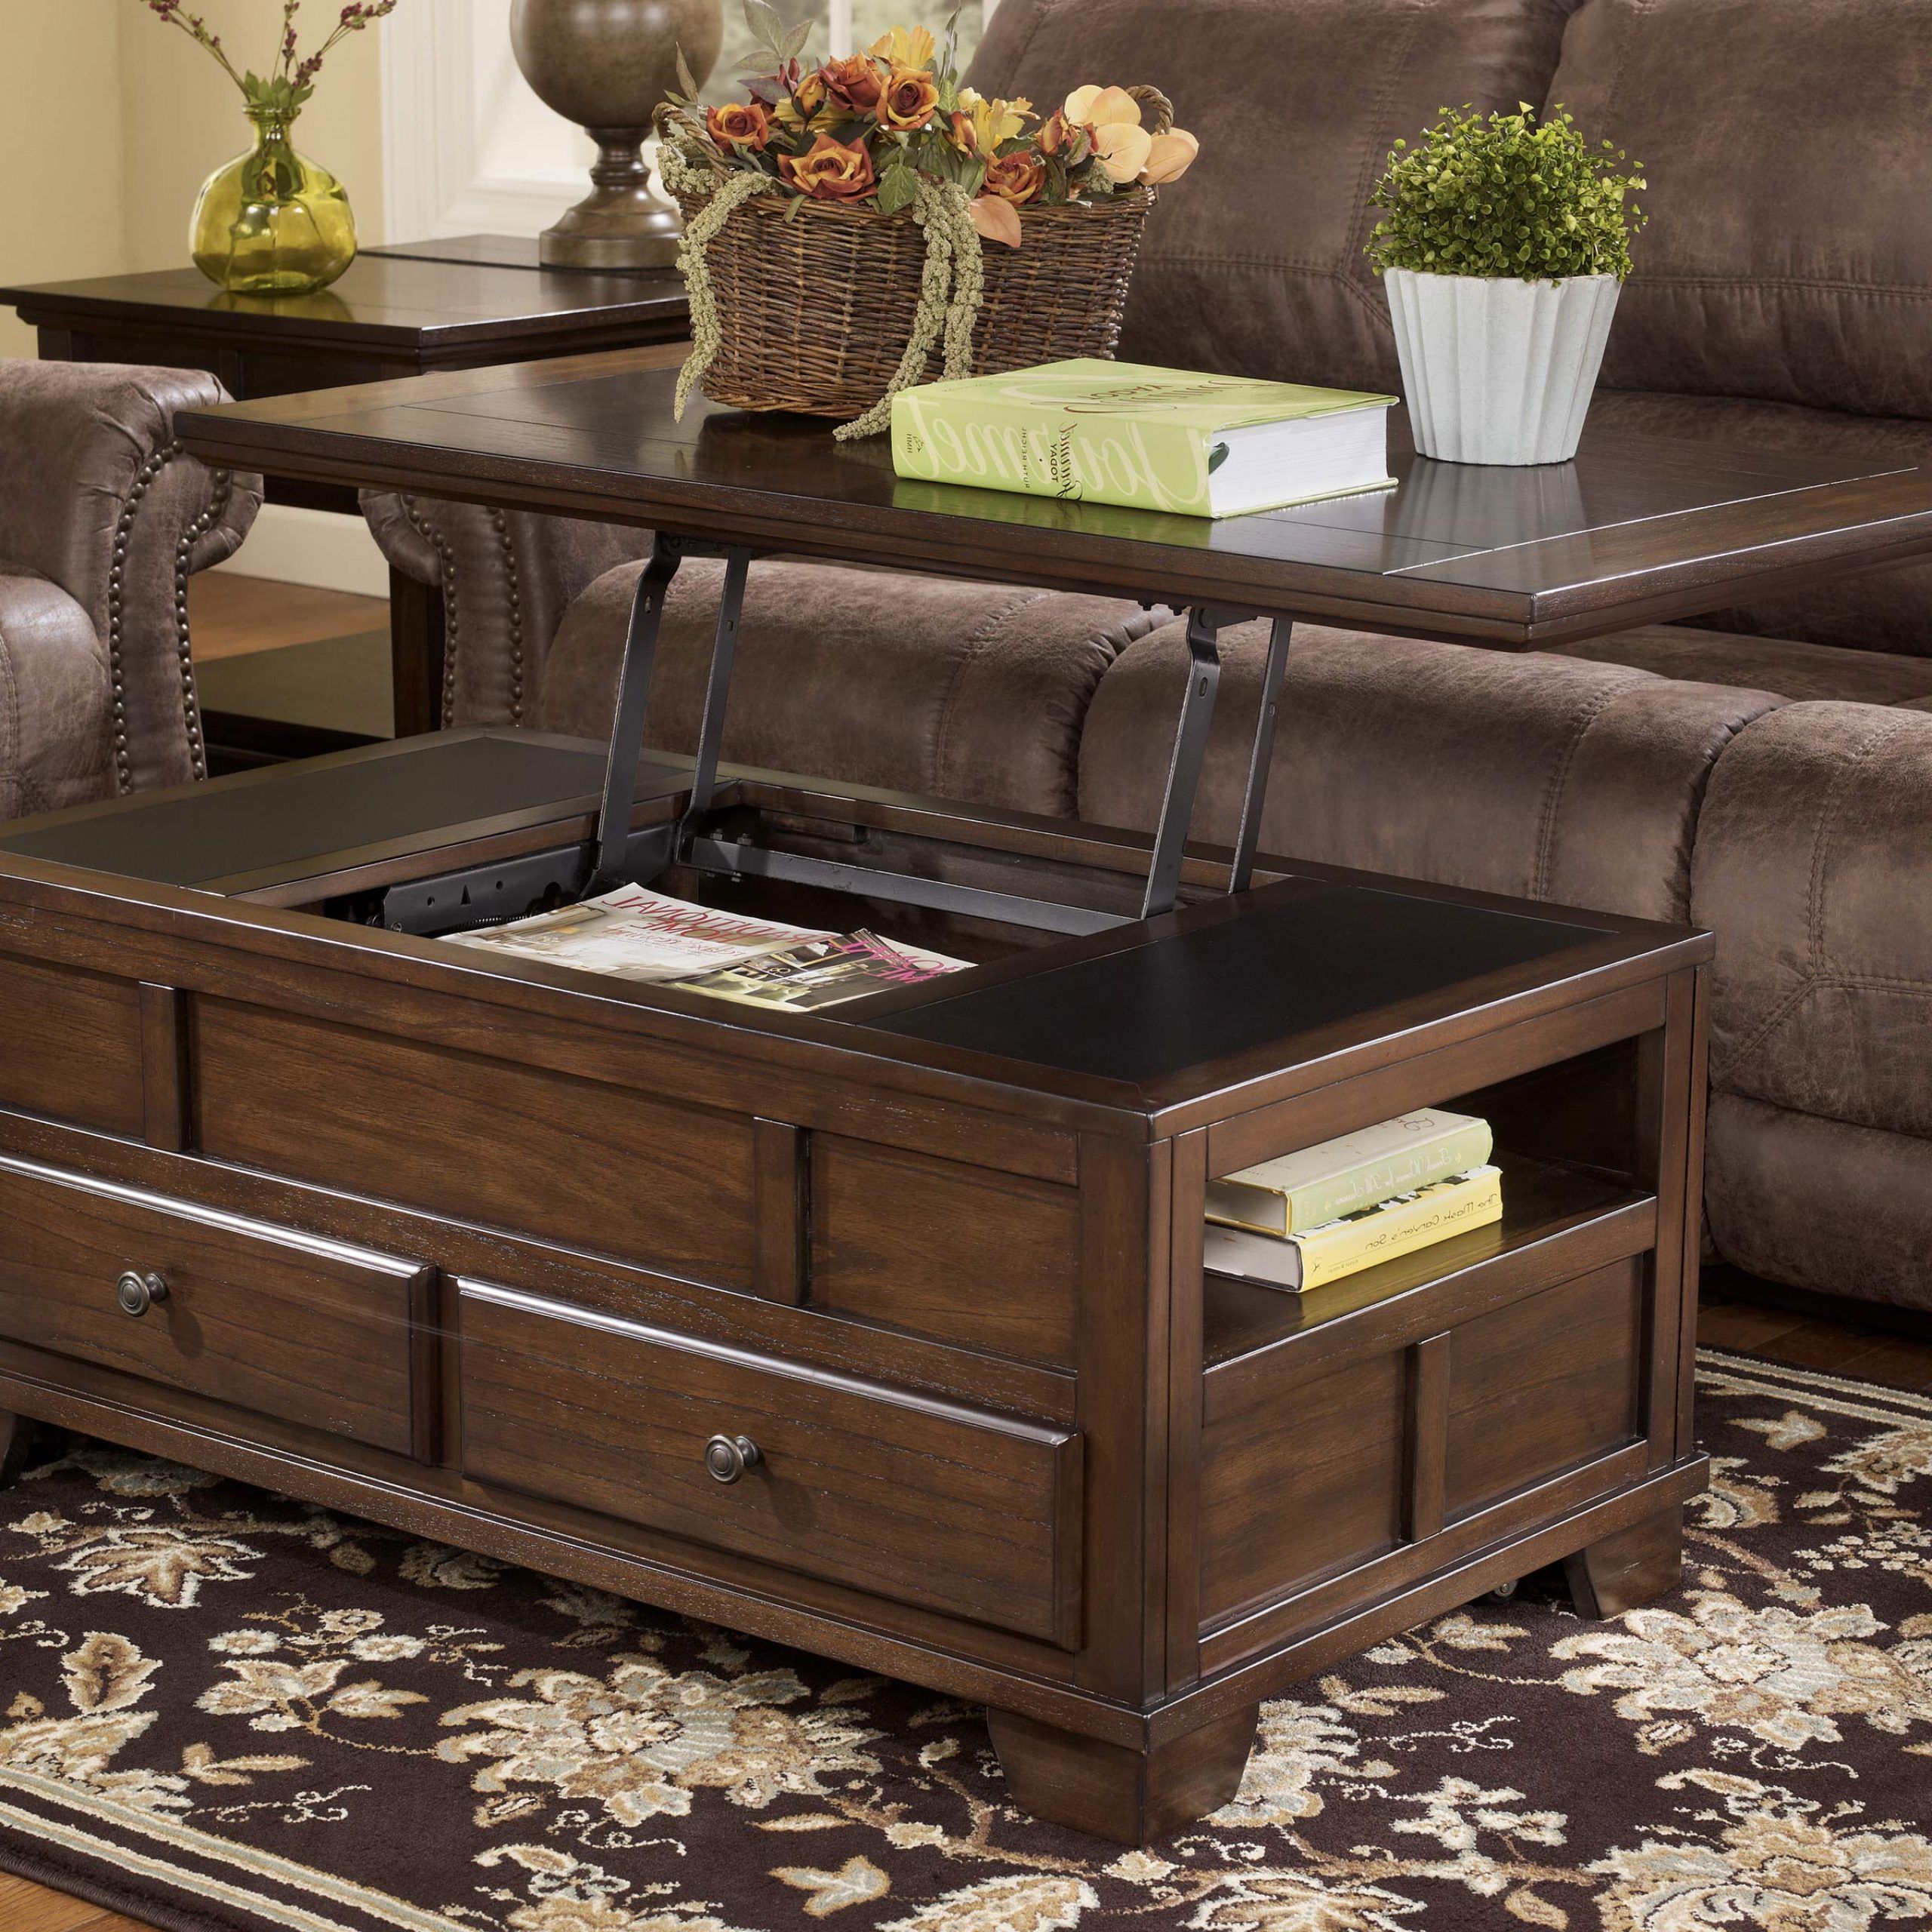 Lift Top Coffee Tables With Storage Intended For Lift Top Coffee Tables With Storage Drawers (Gallery 1 of 20)